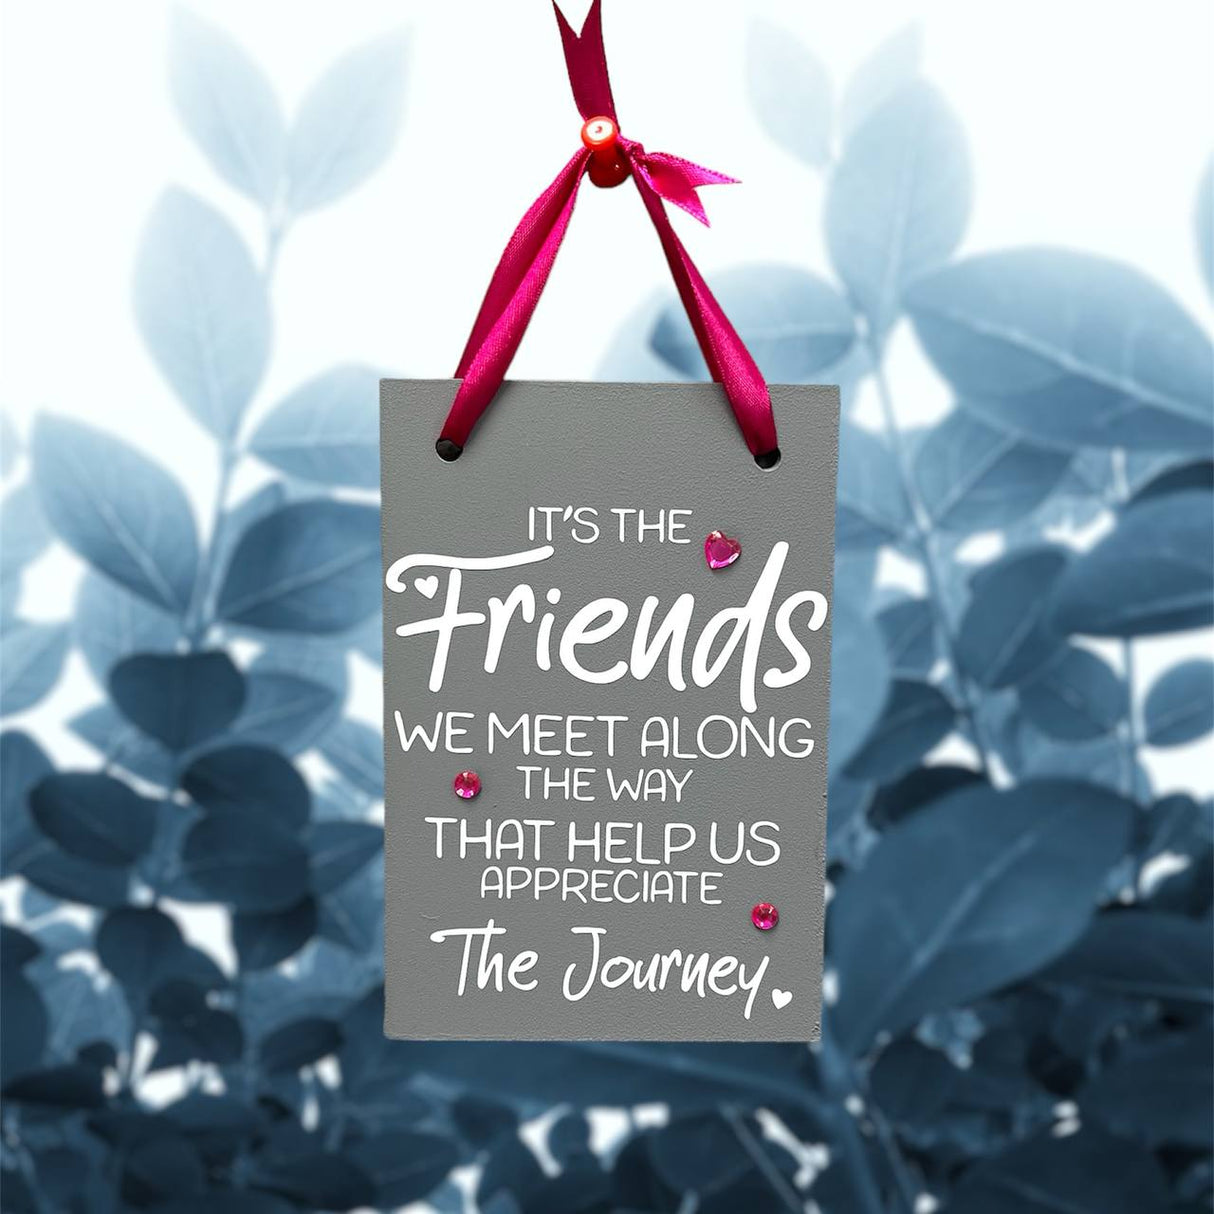 Friends - The Journey